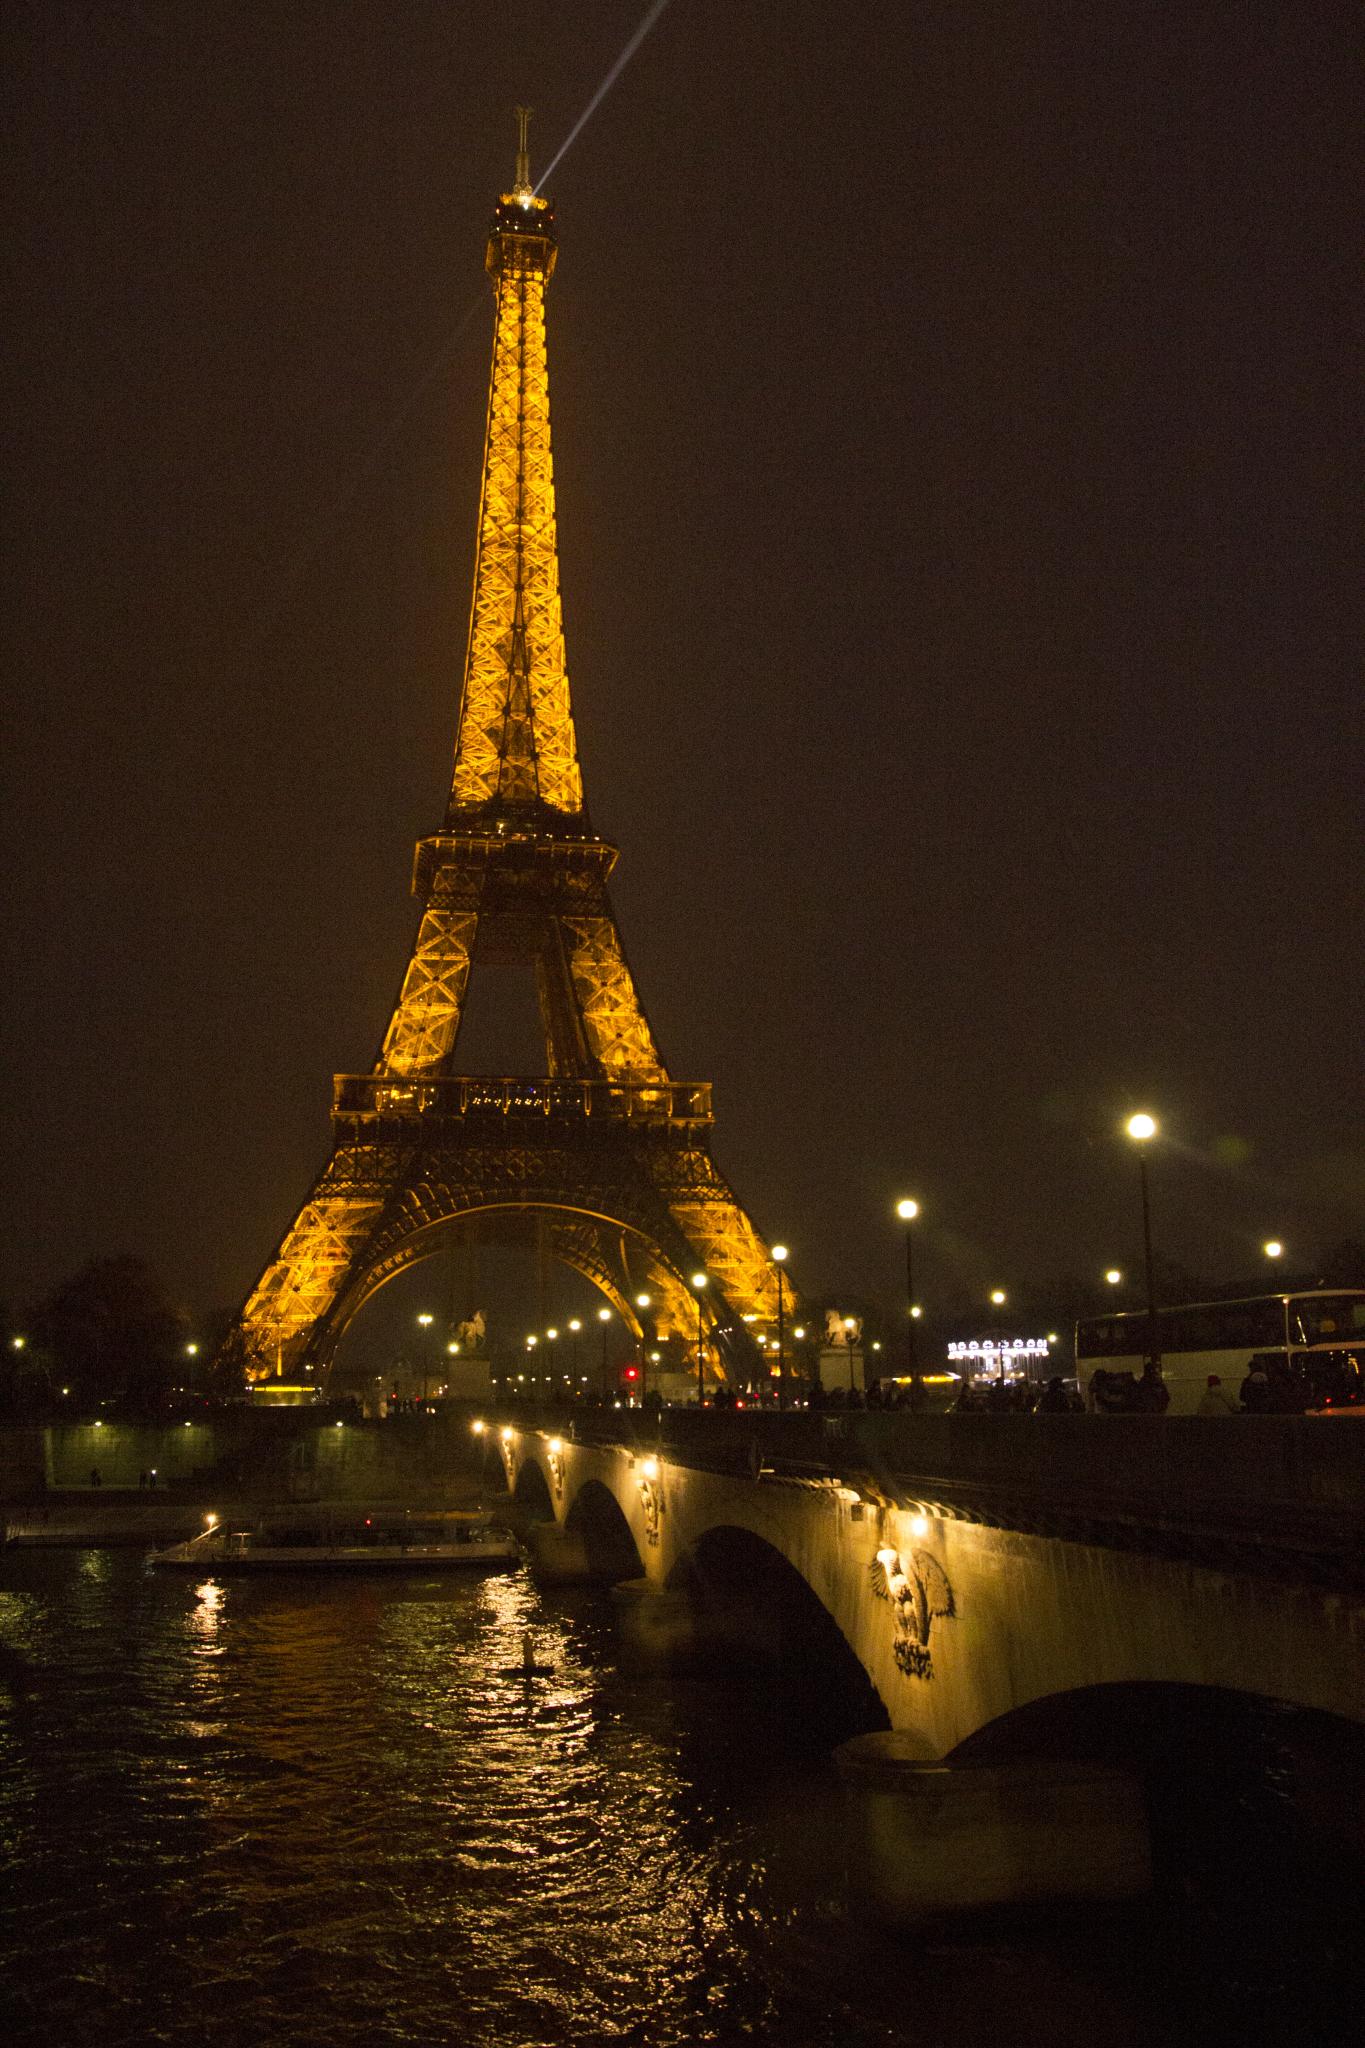 the lights of the eiffel tower are all lit up